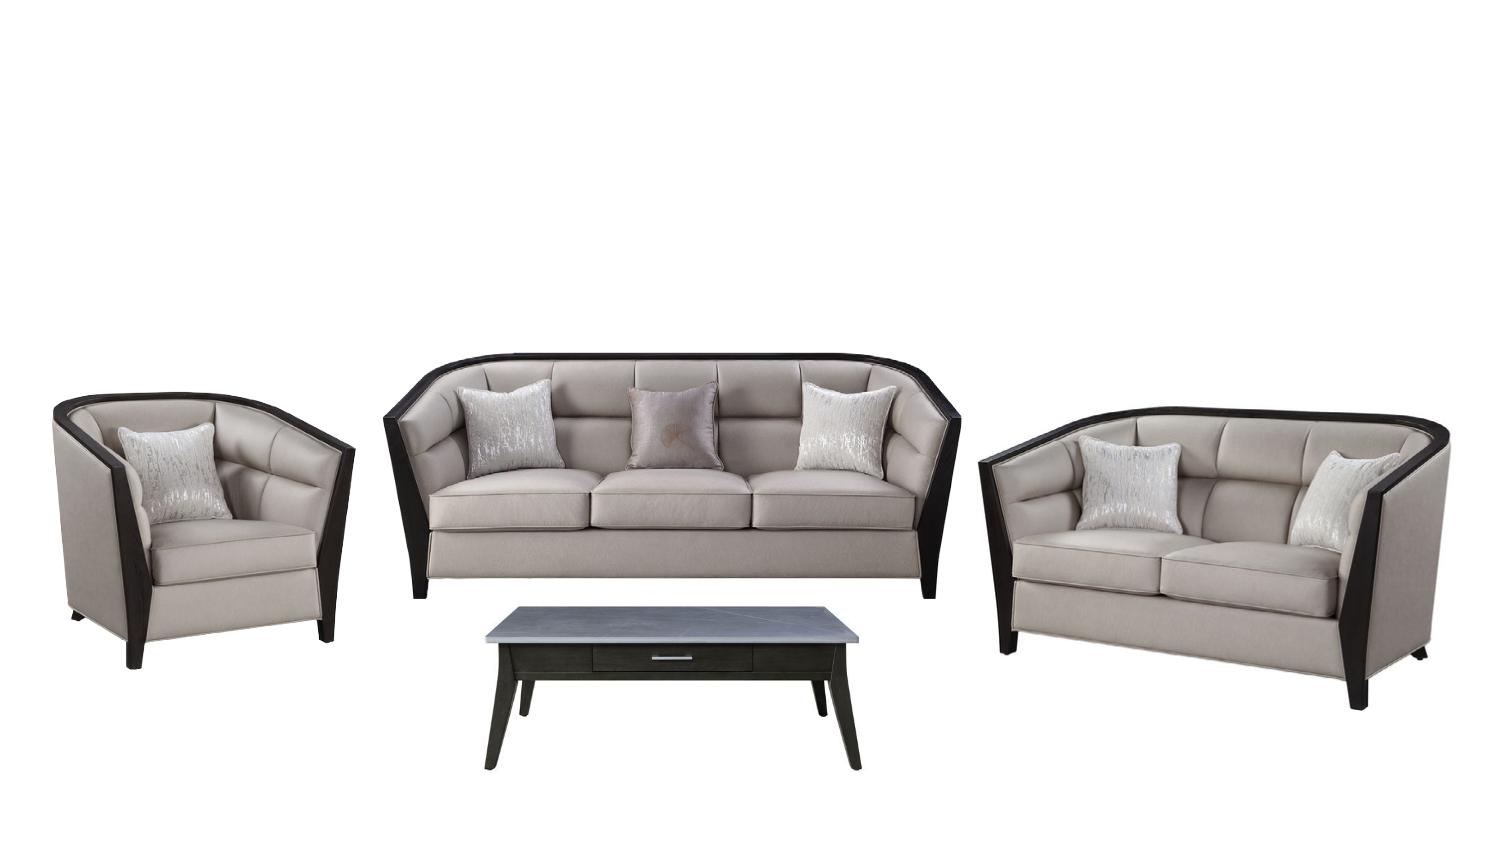 Contemporary, Classic Sofa Loveseat Chair and Coffee Table Zemocryss 54235-4pcs in Beige Fabric